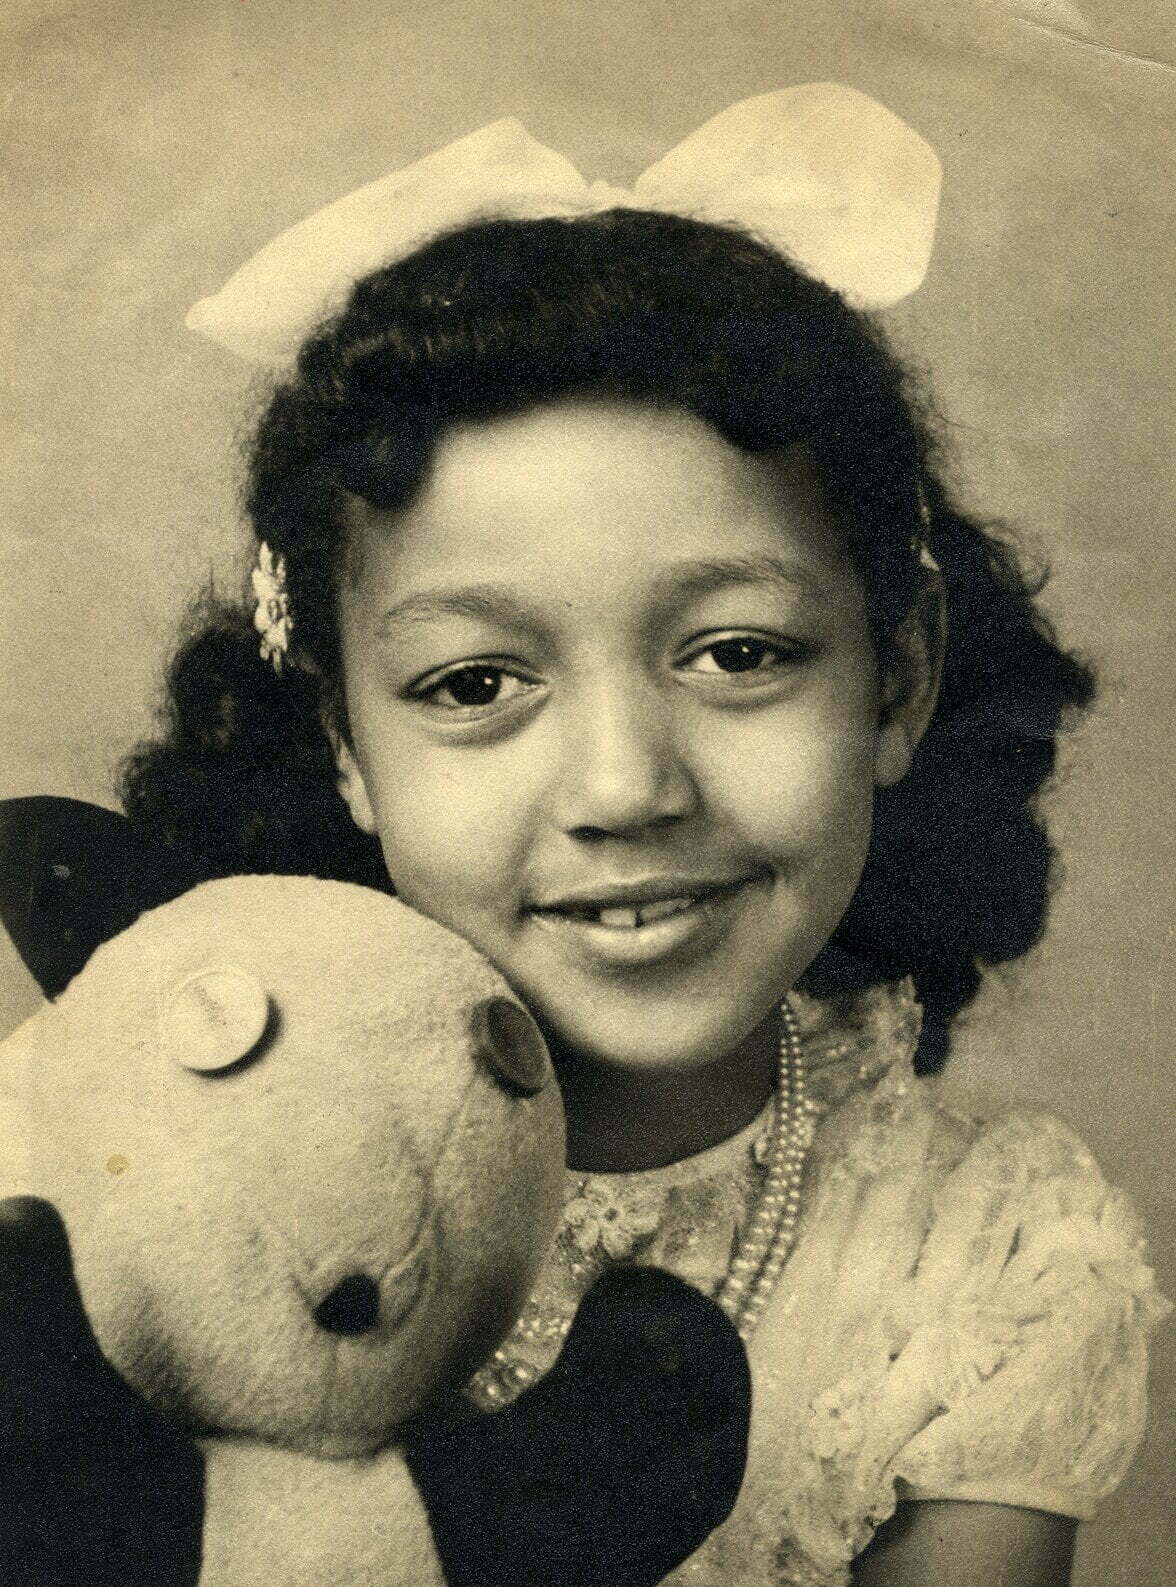 Black and white studio photograph of SuAndi as a young girl with a bow in her hair, holding a teddy and smiling at the camera.